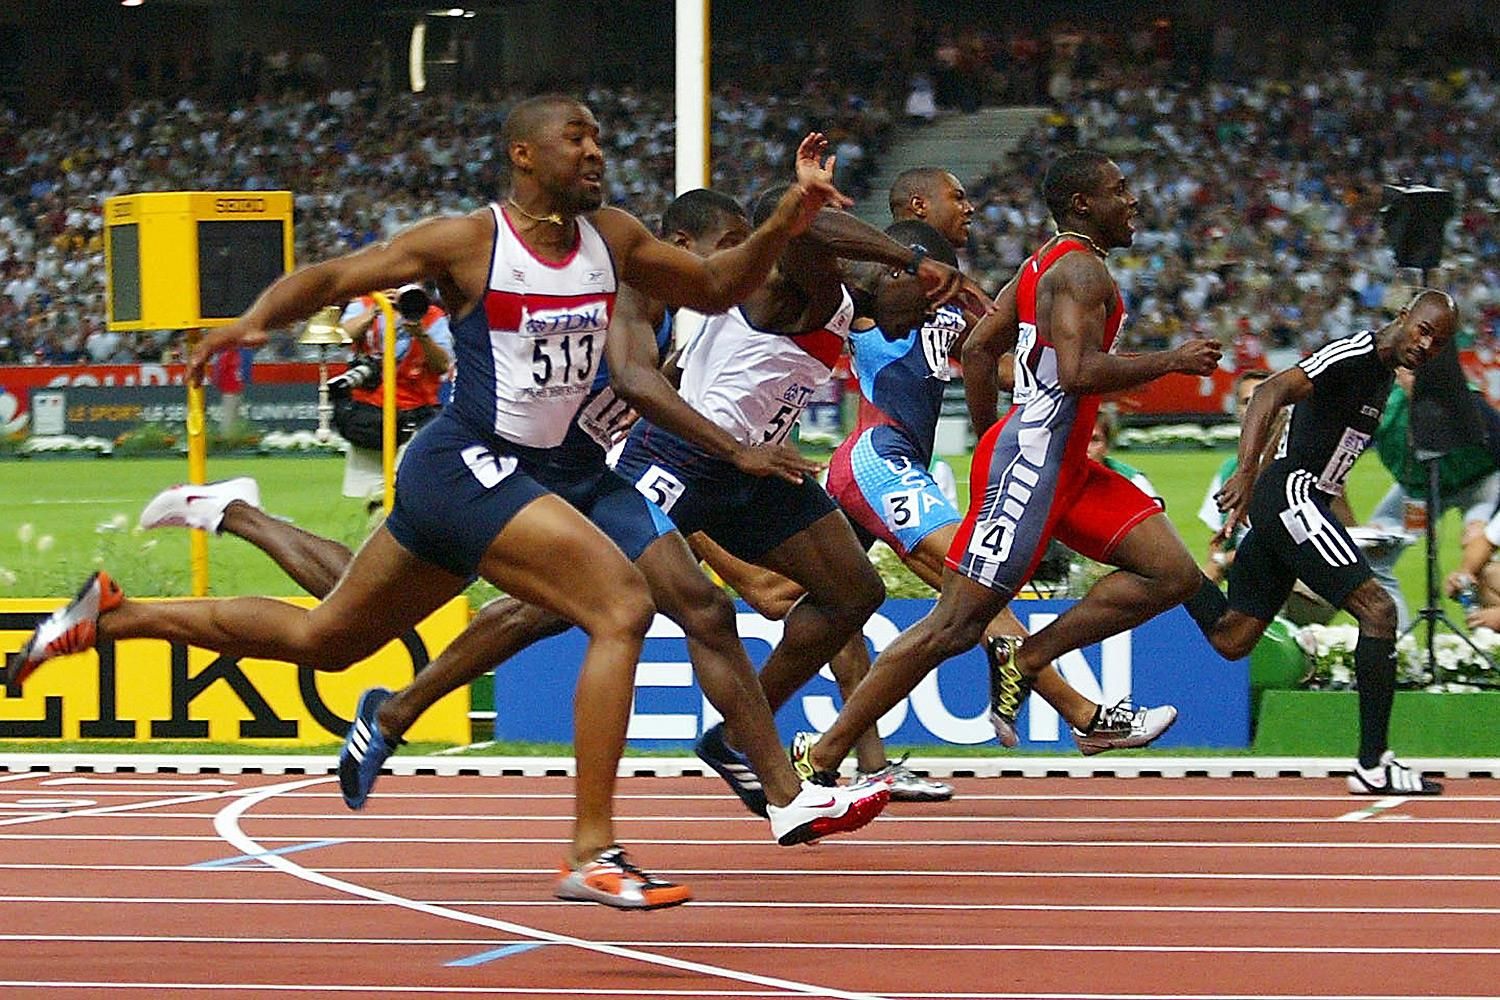 Kim Collins (far right) wins the 100m at the 2003 IAAF World Championships in Paris